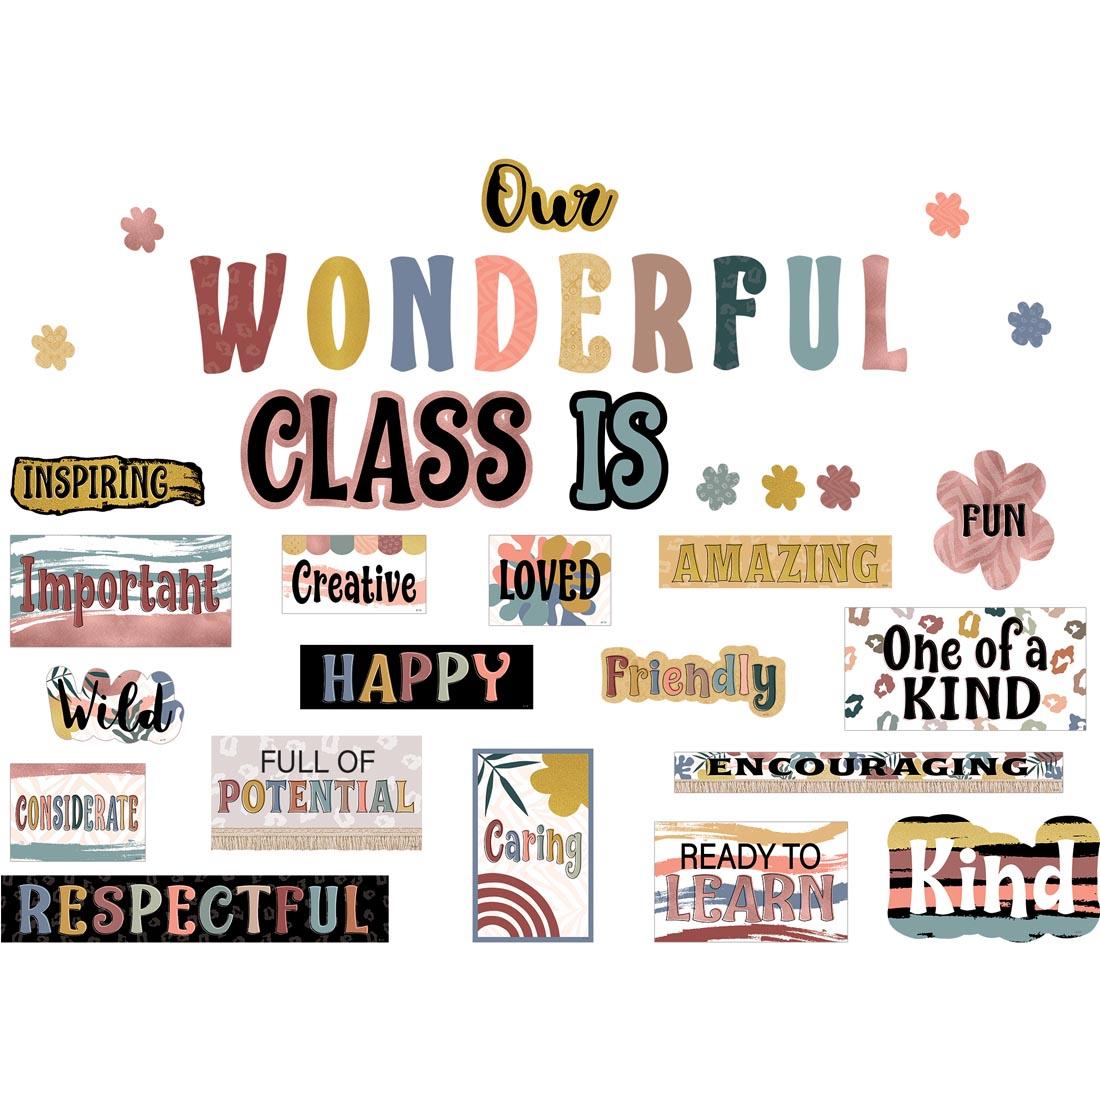 Our Wonderful Class Mini Bulletin Board Set from the Wonderfully Wild collection by Teacher Created Resources